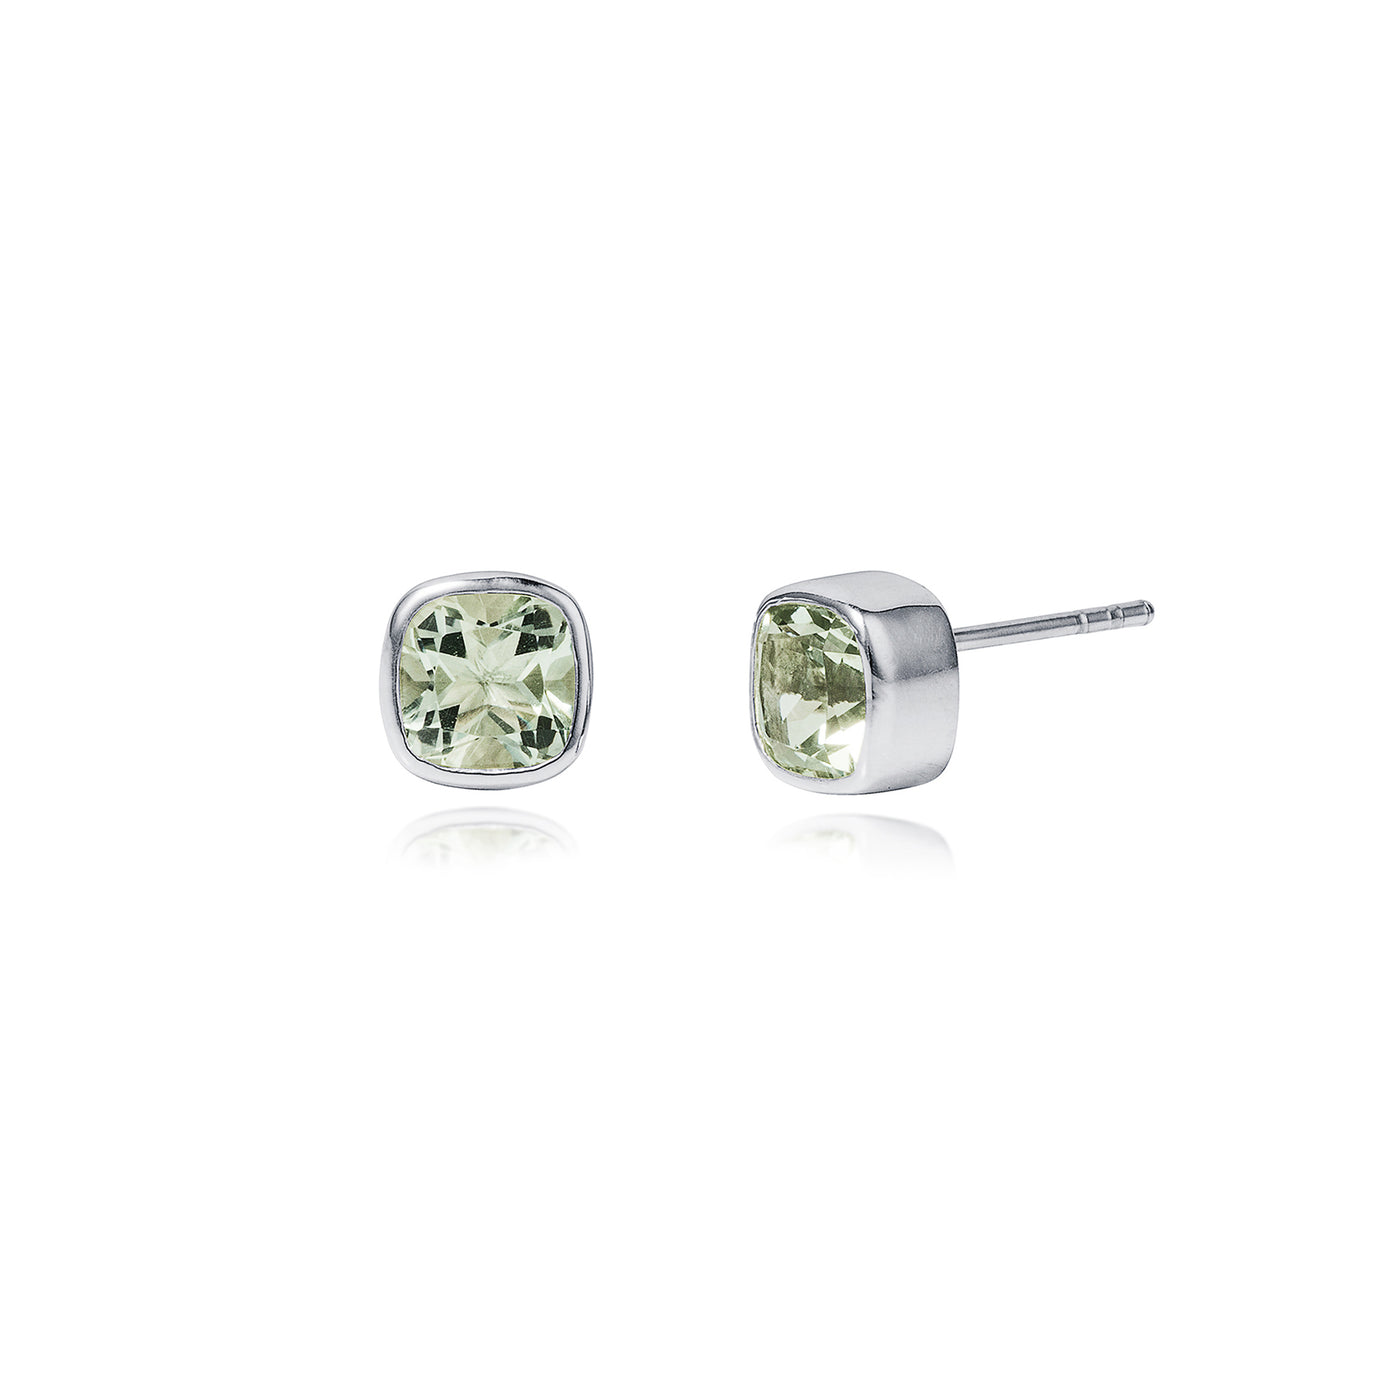 Image of Green Amethyst and Silver Stud Earrings